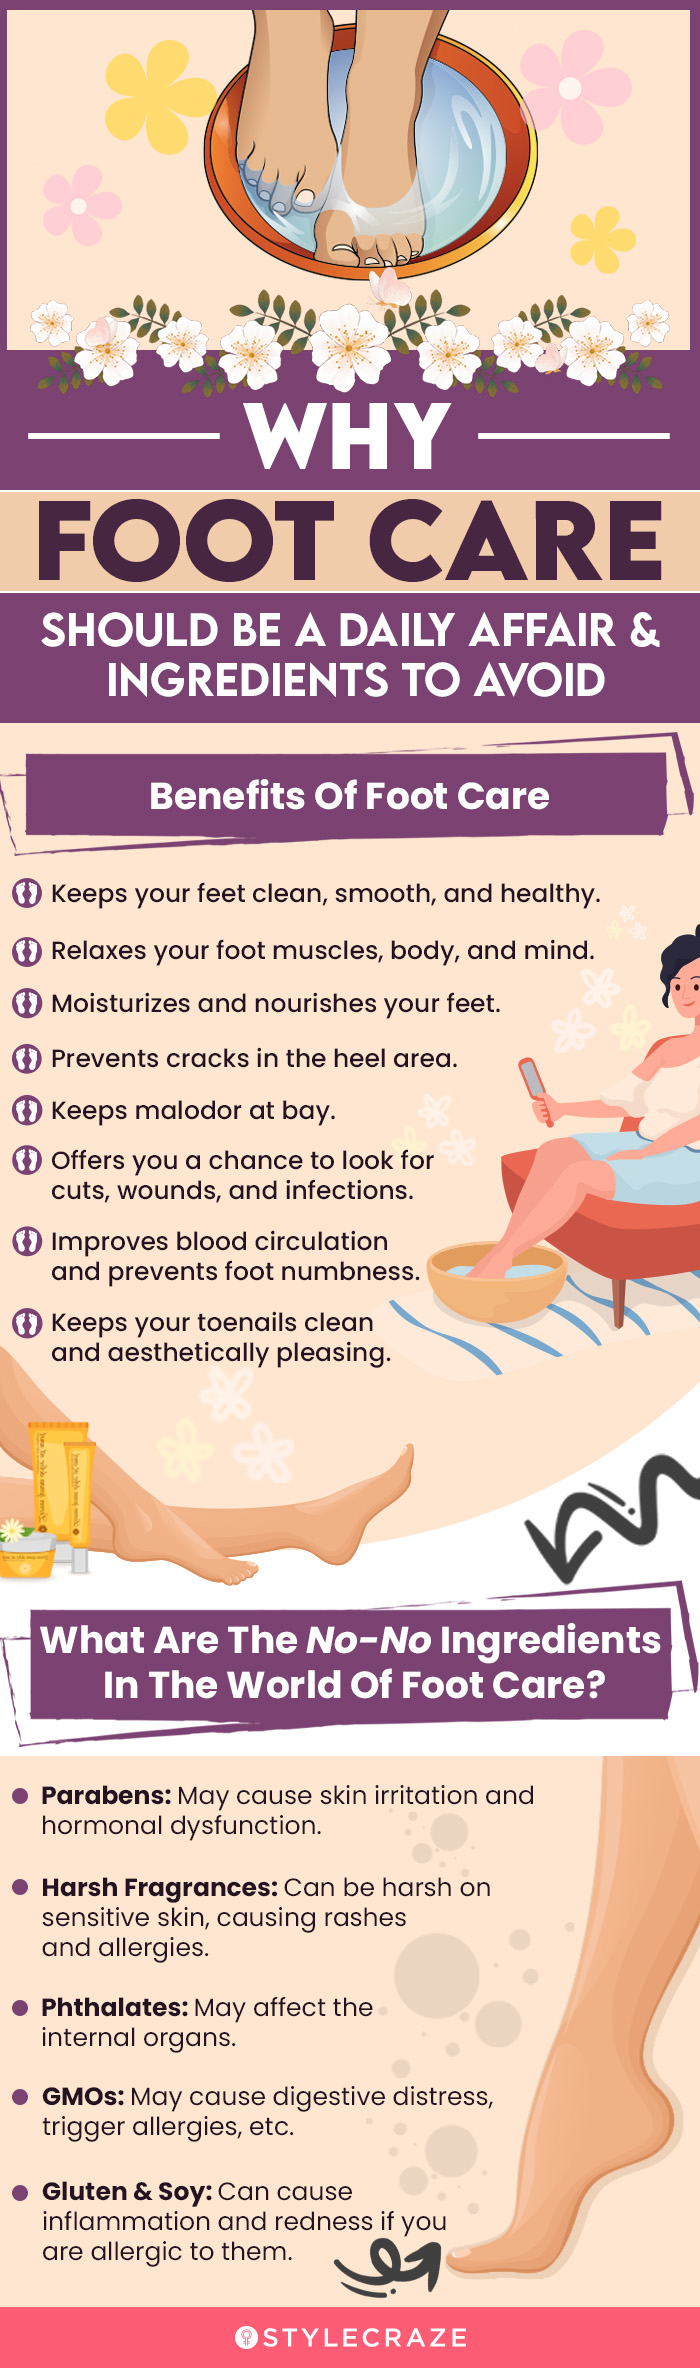 Why Foot Care Should Be A Daily Affair & Ingredients To Avoid (infographic)